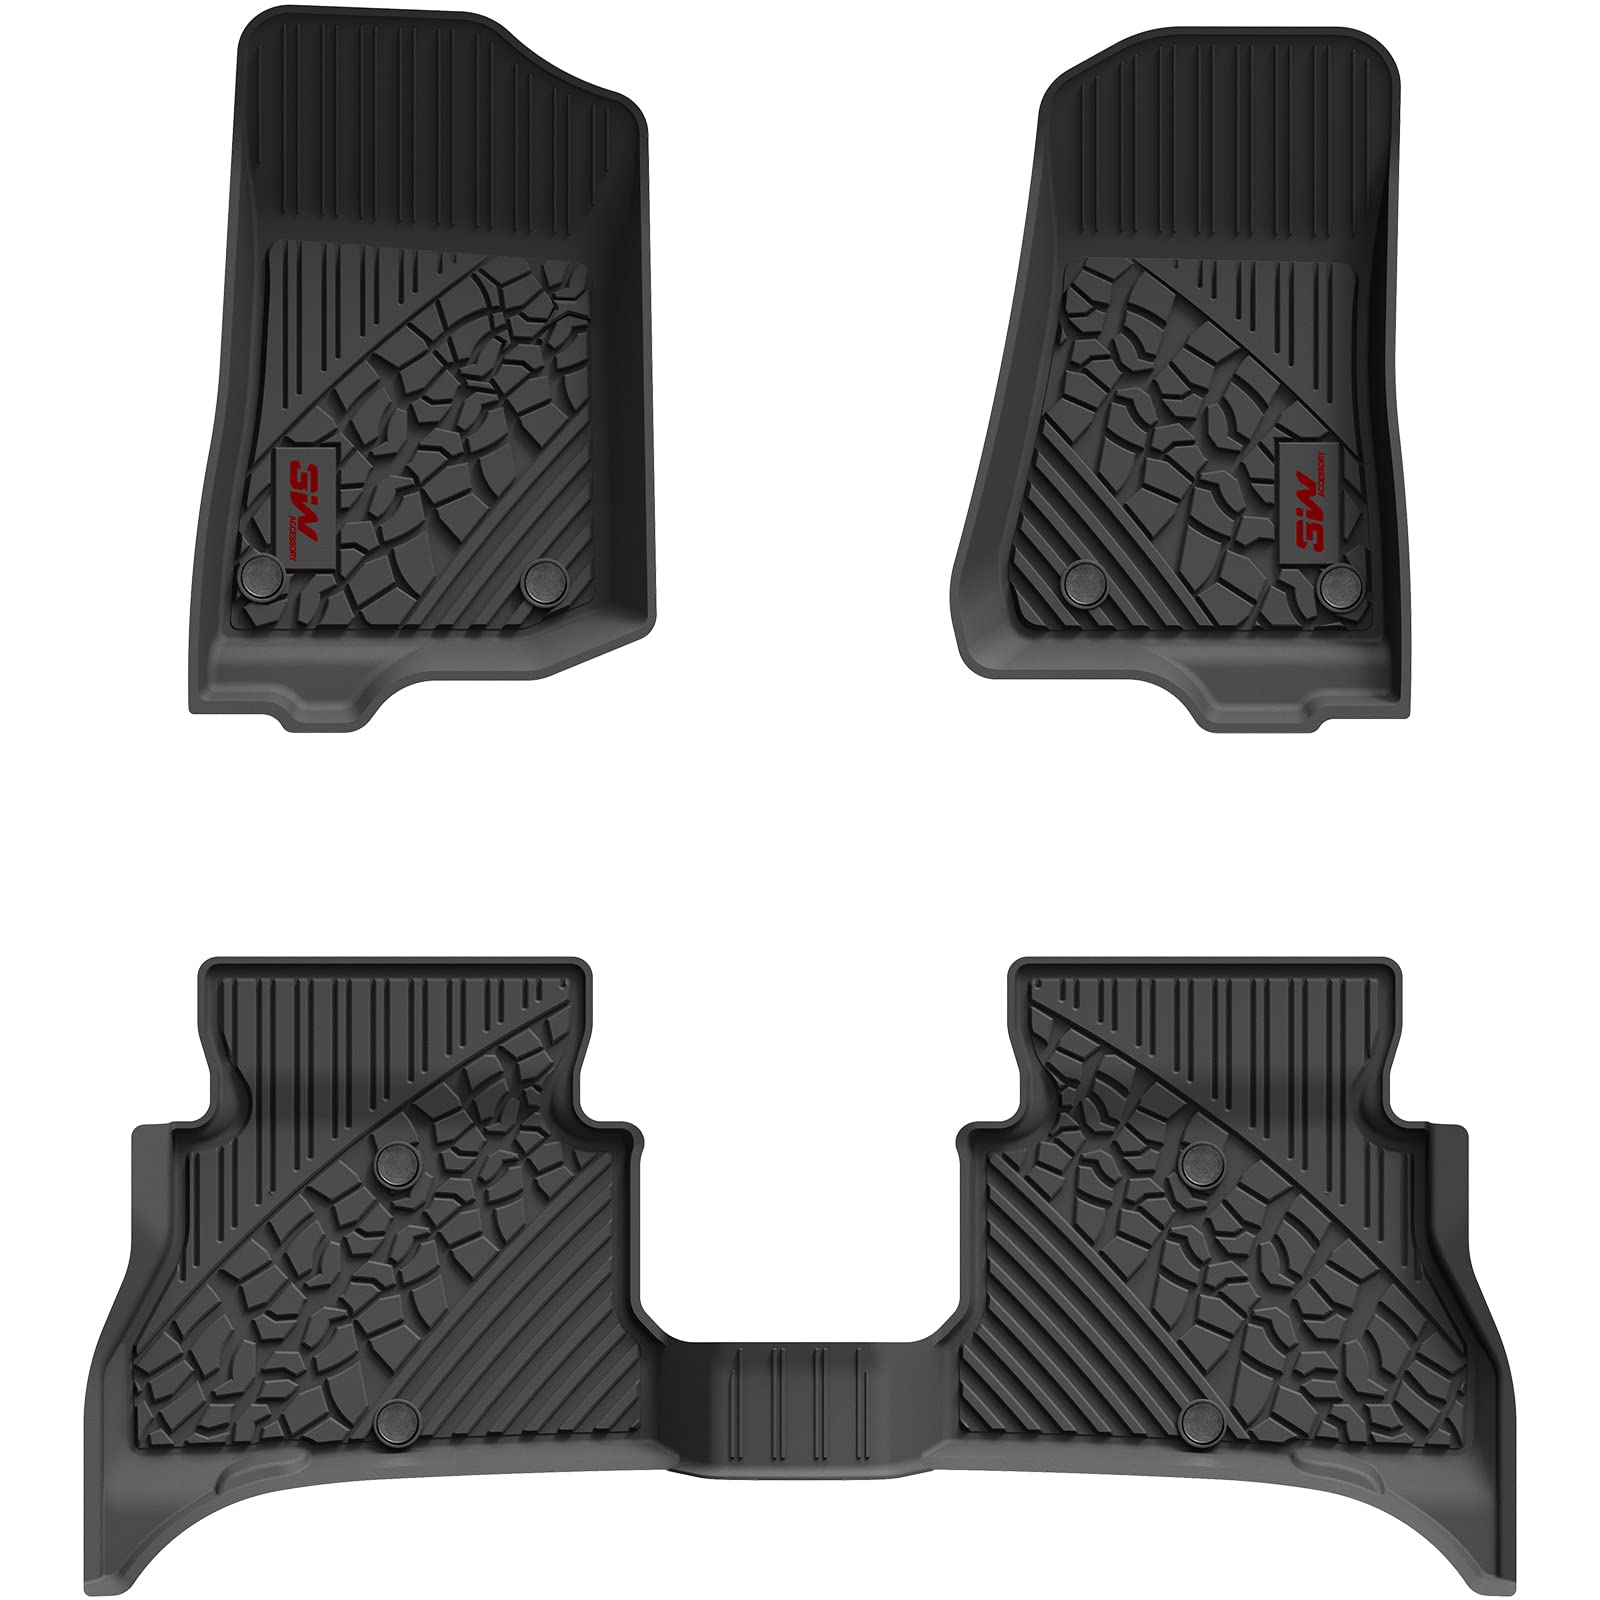 3W Jeep Wrangler 4XE 2021-2024 Hybrid 4 Door (Non JL or JK) Custom Floor Mats TPE Material & All-Weather Protection Vehicles & Parts 3Wliners 2021-2024 Wrangler 4XE 2021-2024 1st&2nd Row Mats with Red Logo